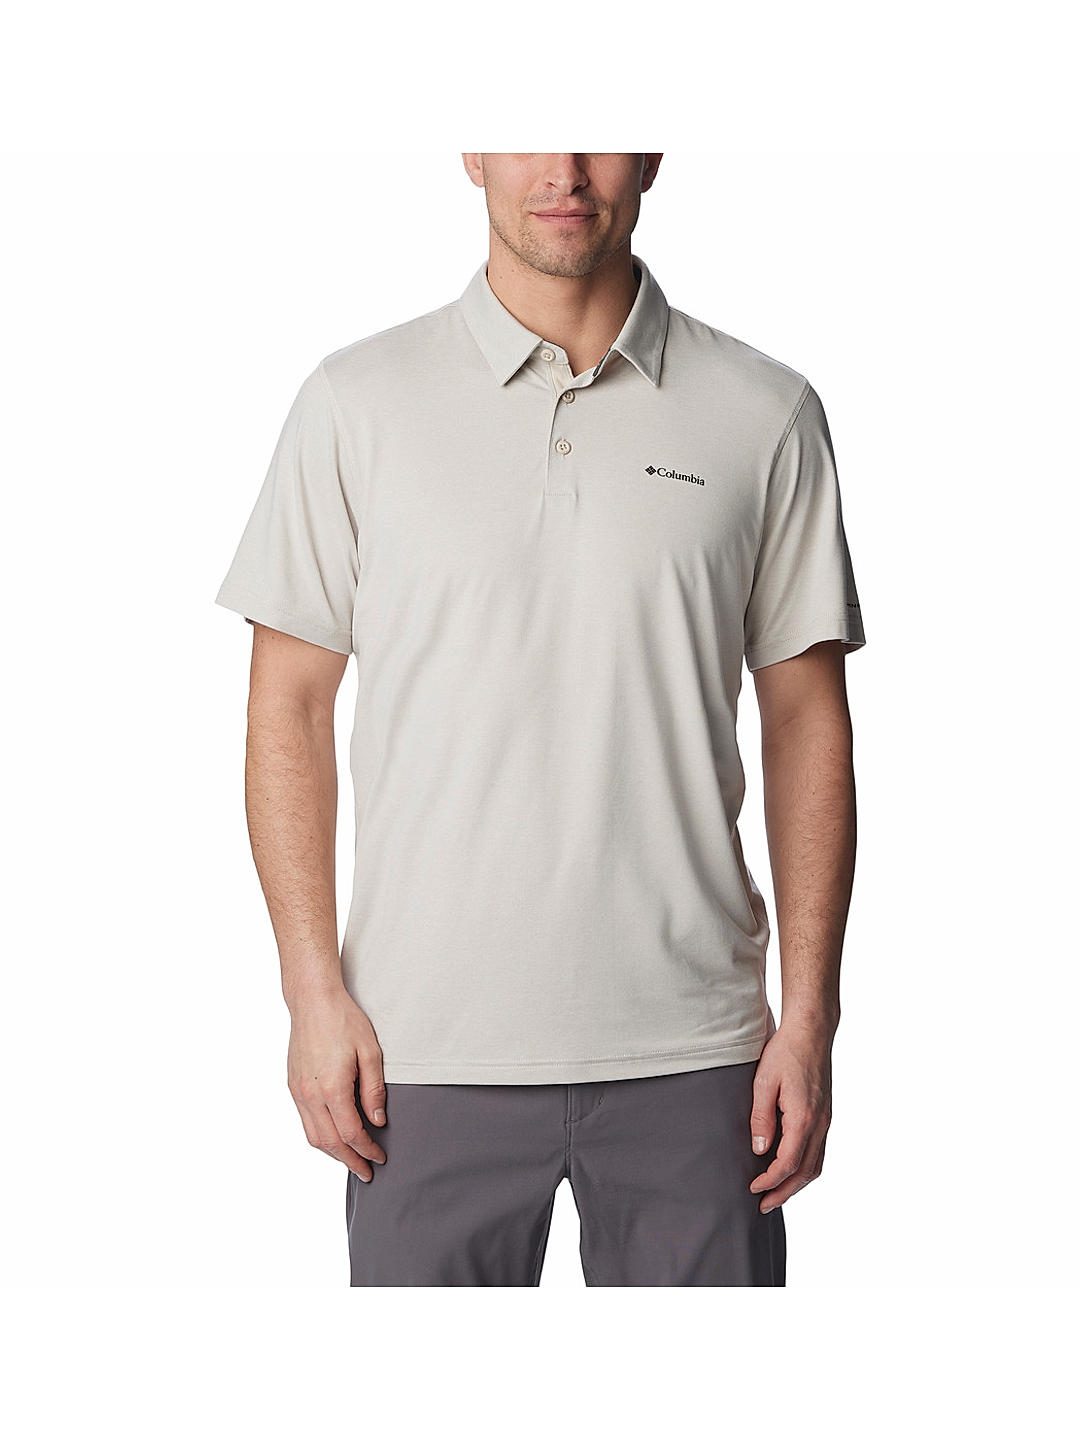 Buy Brown Tech Trail Polo T-shirts for Men Online at Columbia Sportswear